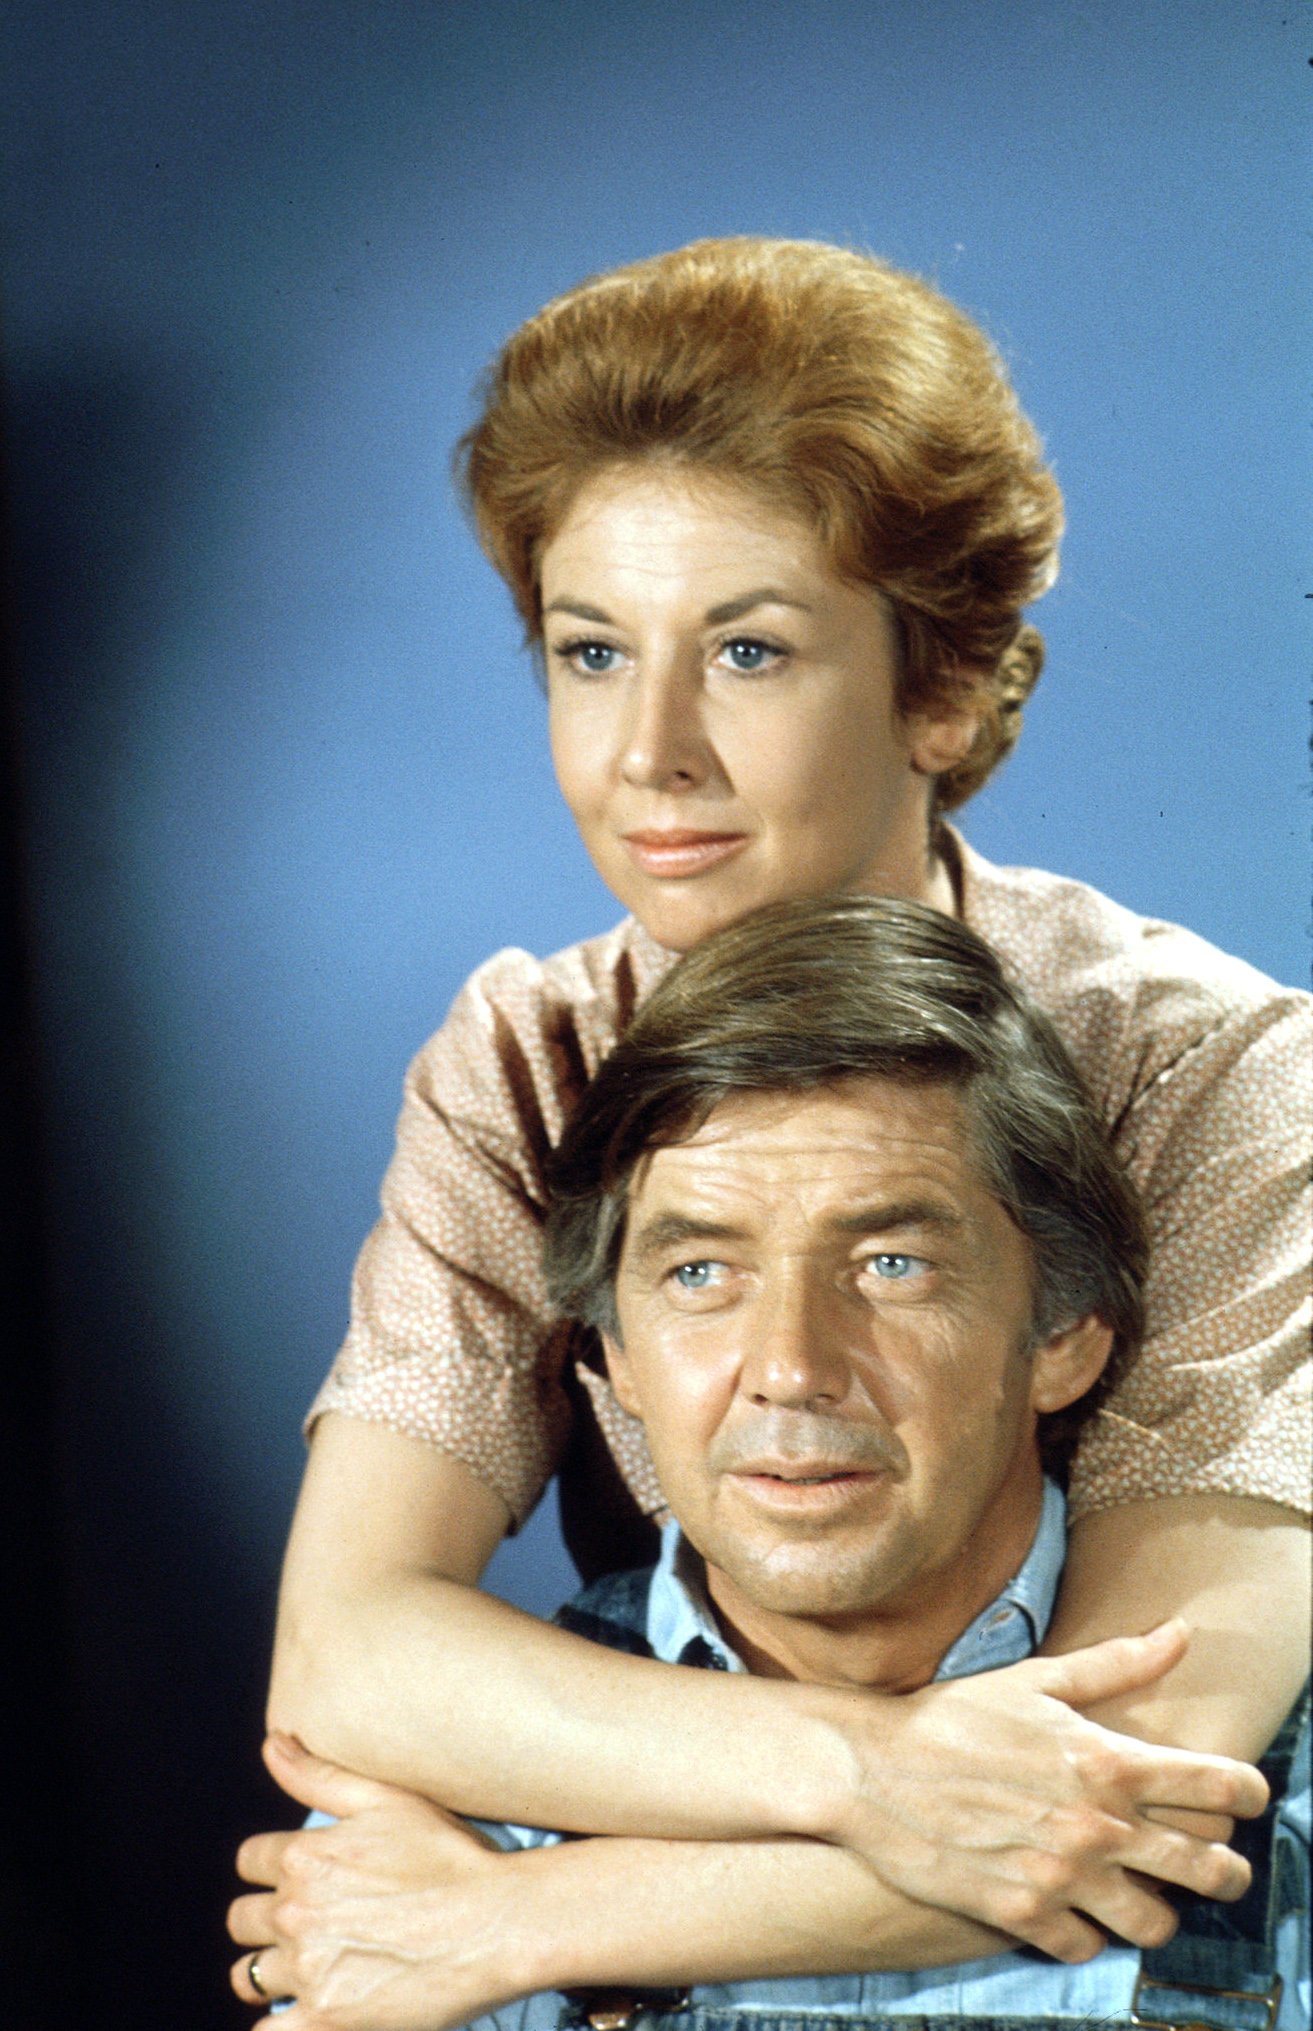 Actress Michael Learned (as Olivia Walton) and actor Ralph Waite (as John Walton) in "The Waltons" on January 1, 1974 ┃Source: Getty Images